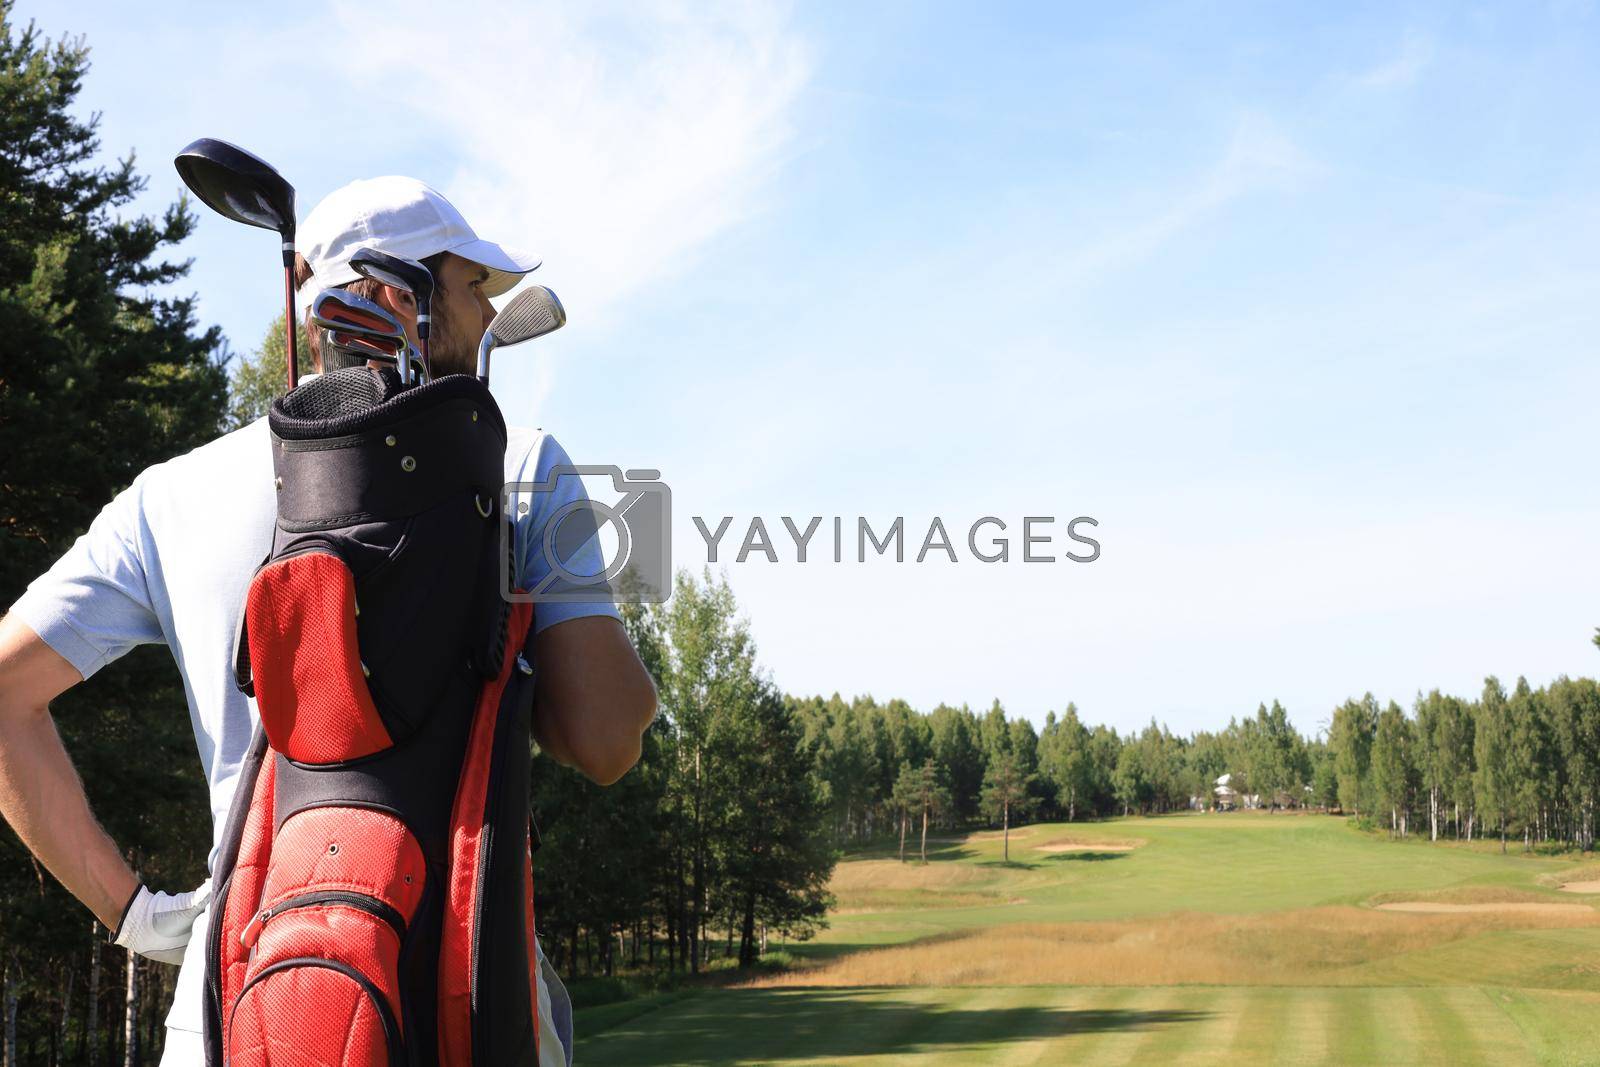 Royalty free image of Golf player walking and carrying bag on course during summer game golfing. by tsyhun